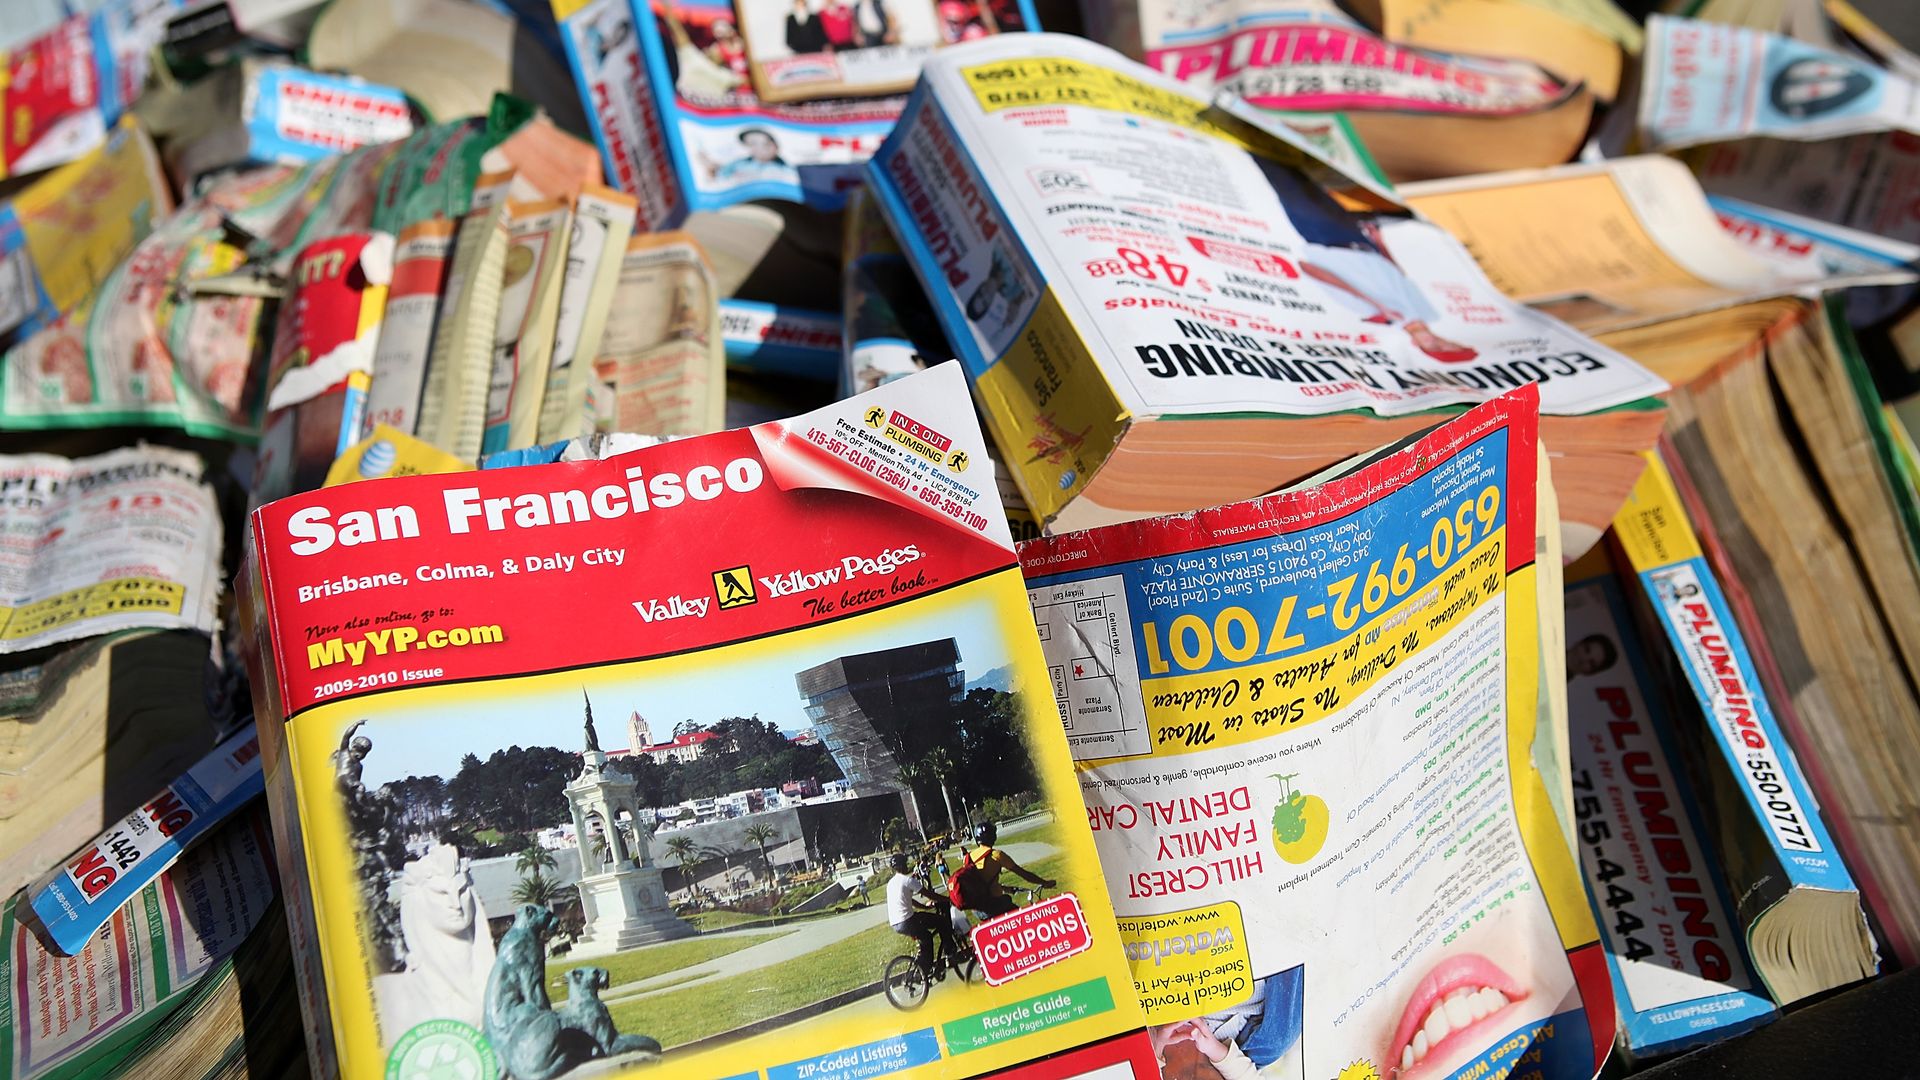 A stack of phonebooks